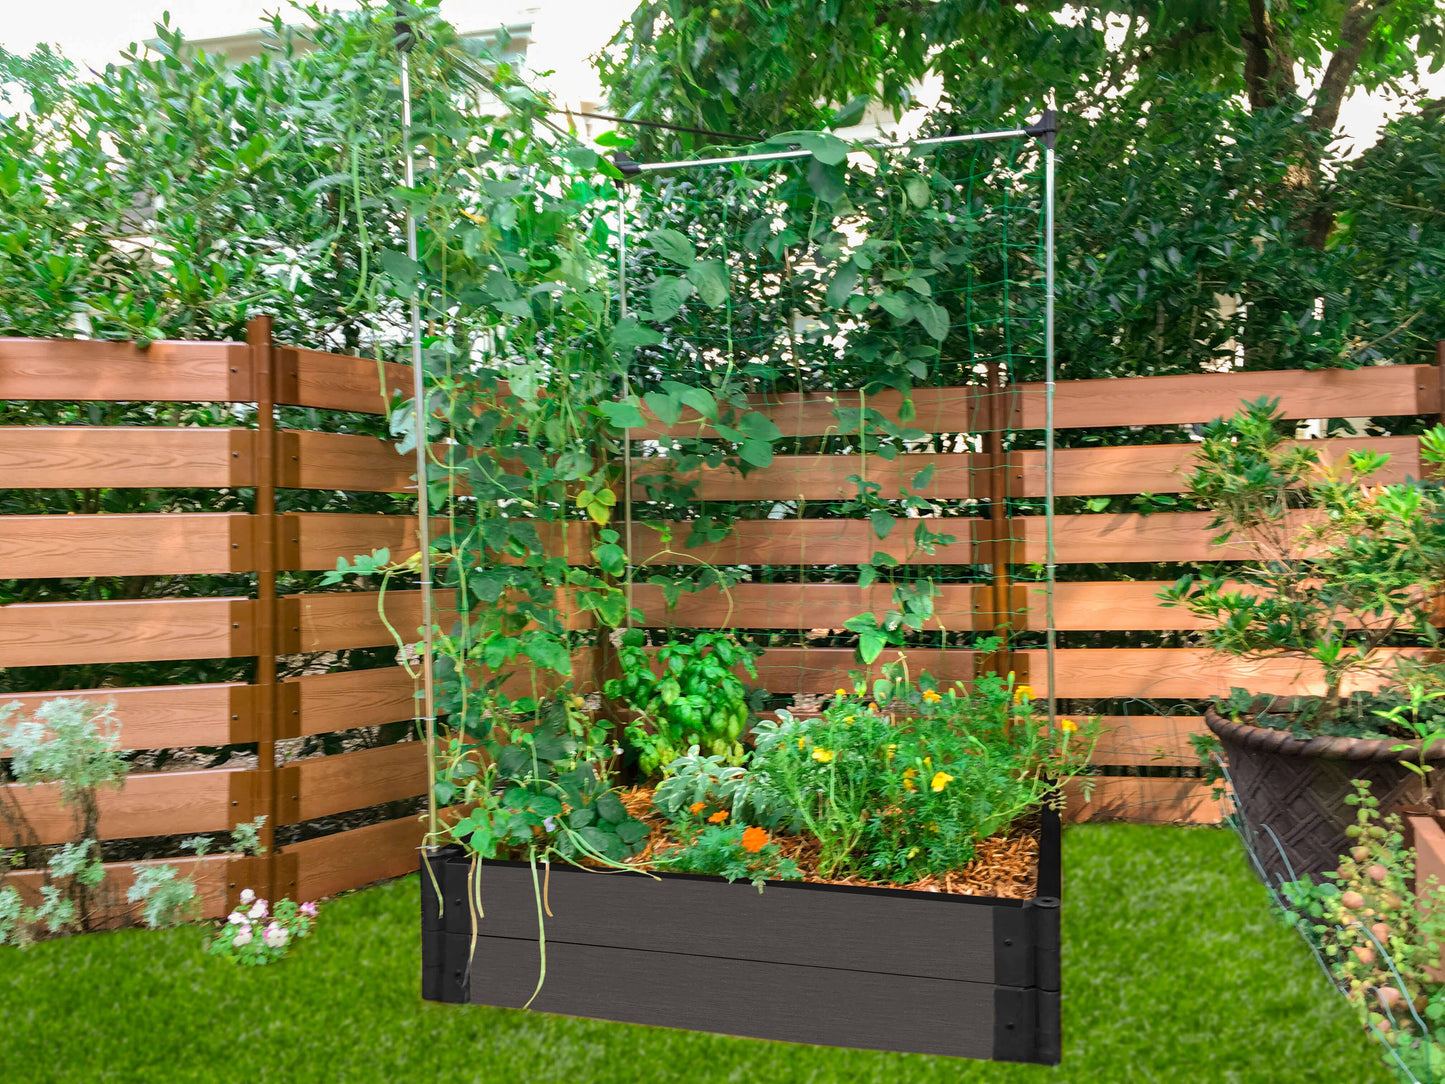 4' x 4' Raised Garden Bed with Trellis Raised Garden Beds Frame It All Weathered Wood 1" 2 = 11"